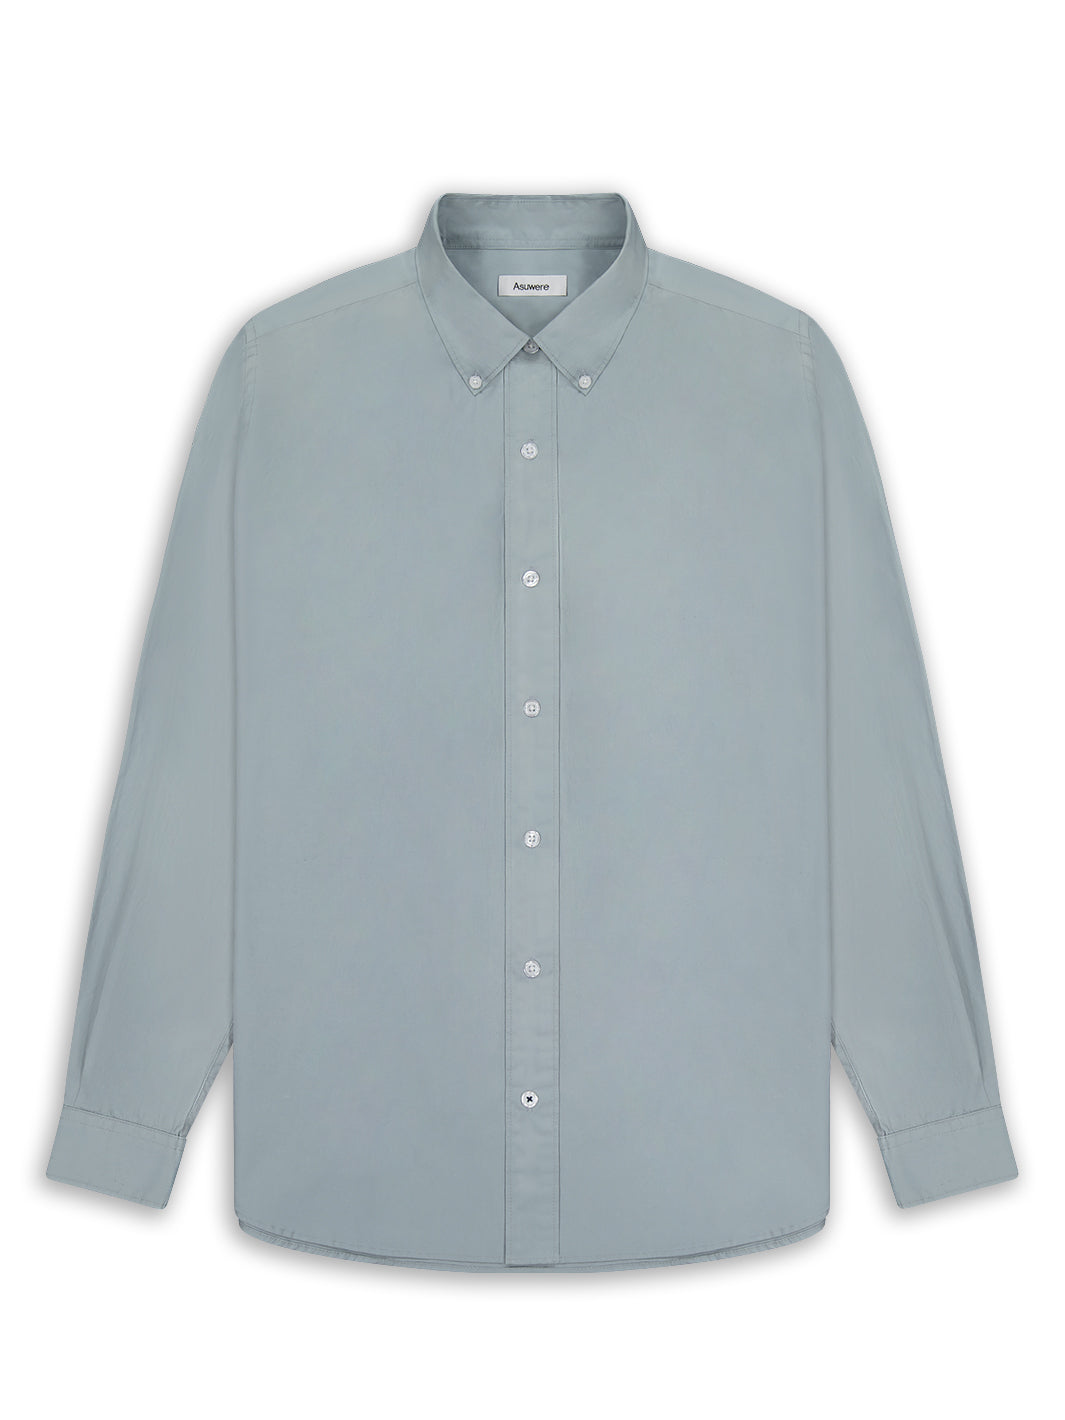 Front of Dusty Blue Poplin Button Down Shirt against white background